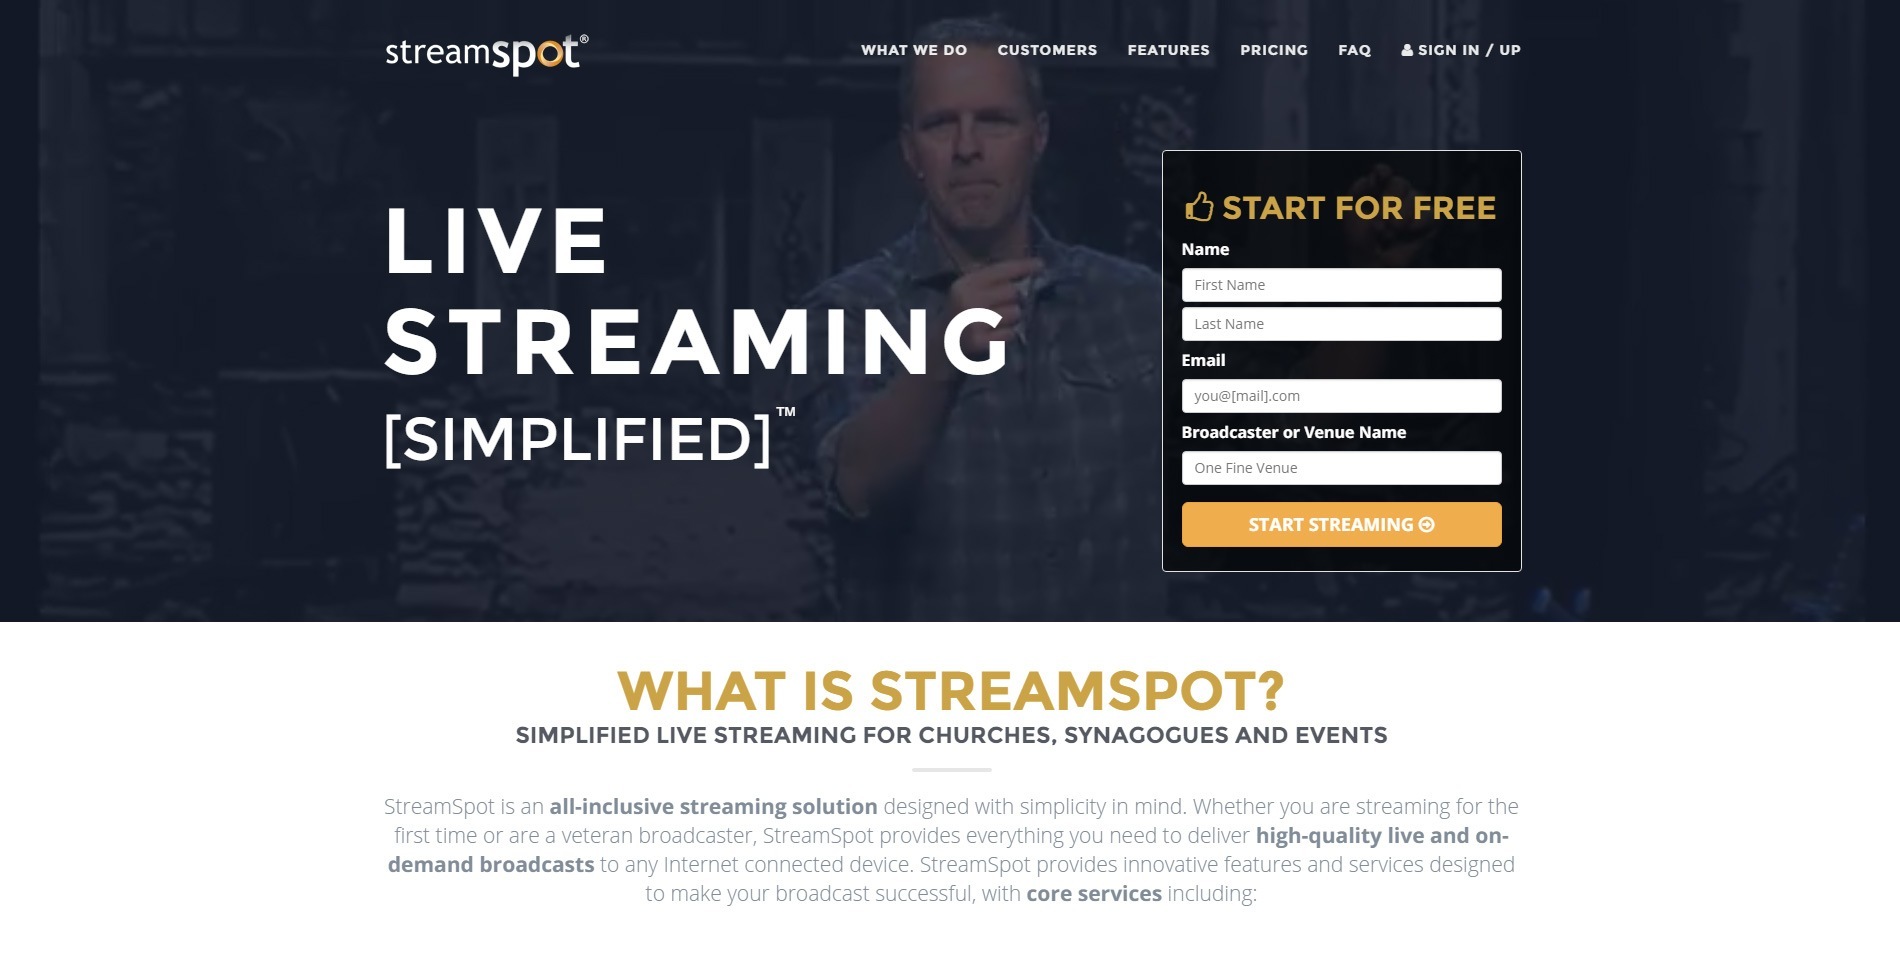 streamspot - Streaming Service for Churches